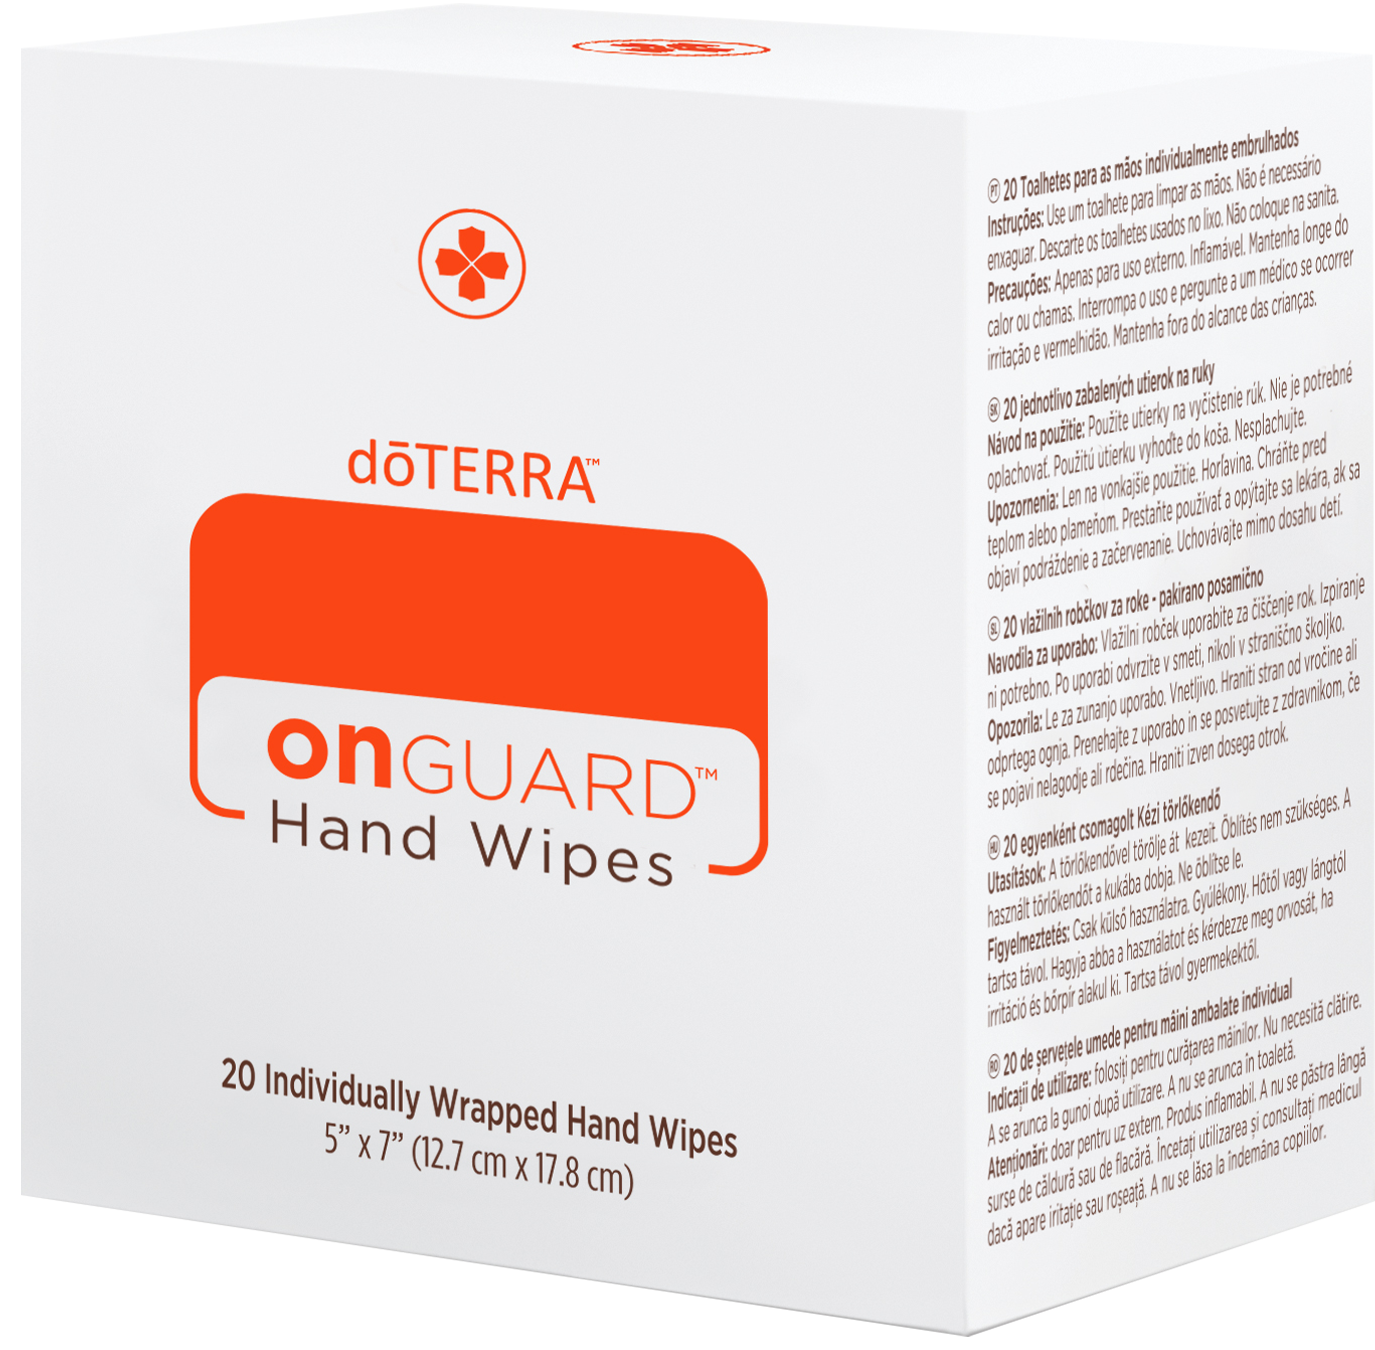 https://shop.doterra.com/custom/europe/images/products/essential-oils/on-guard/onguardwipes-20ct-large-1720x1350.png